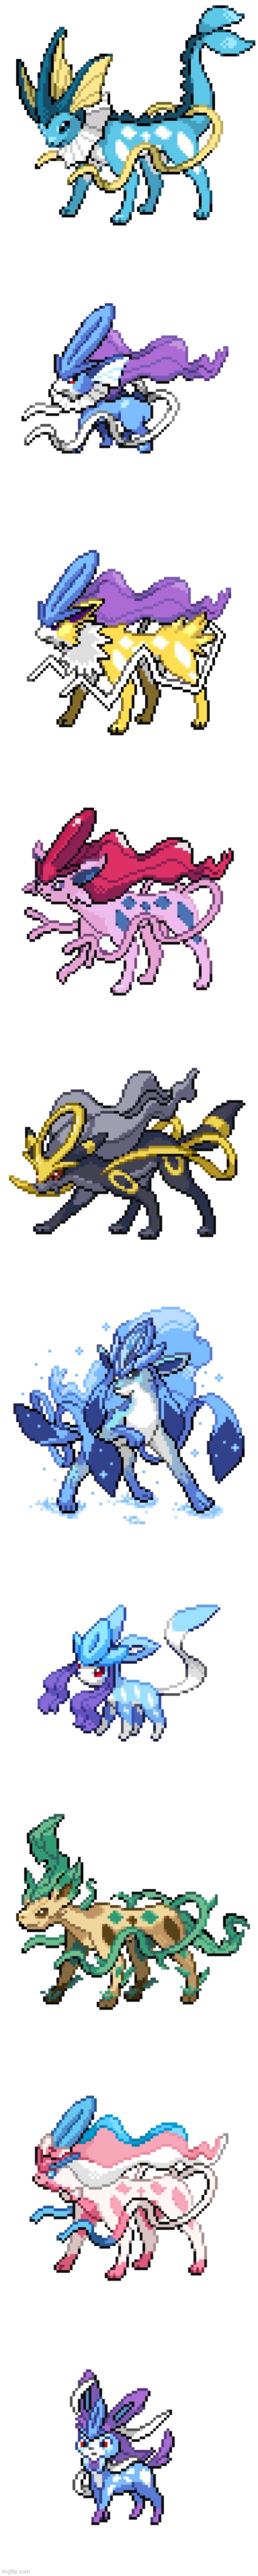 The Eeveelutions fused with Suicune (Minus Flareon) | made w/ Imgflip meme maker